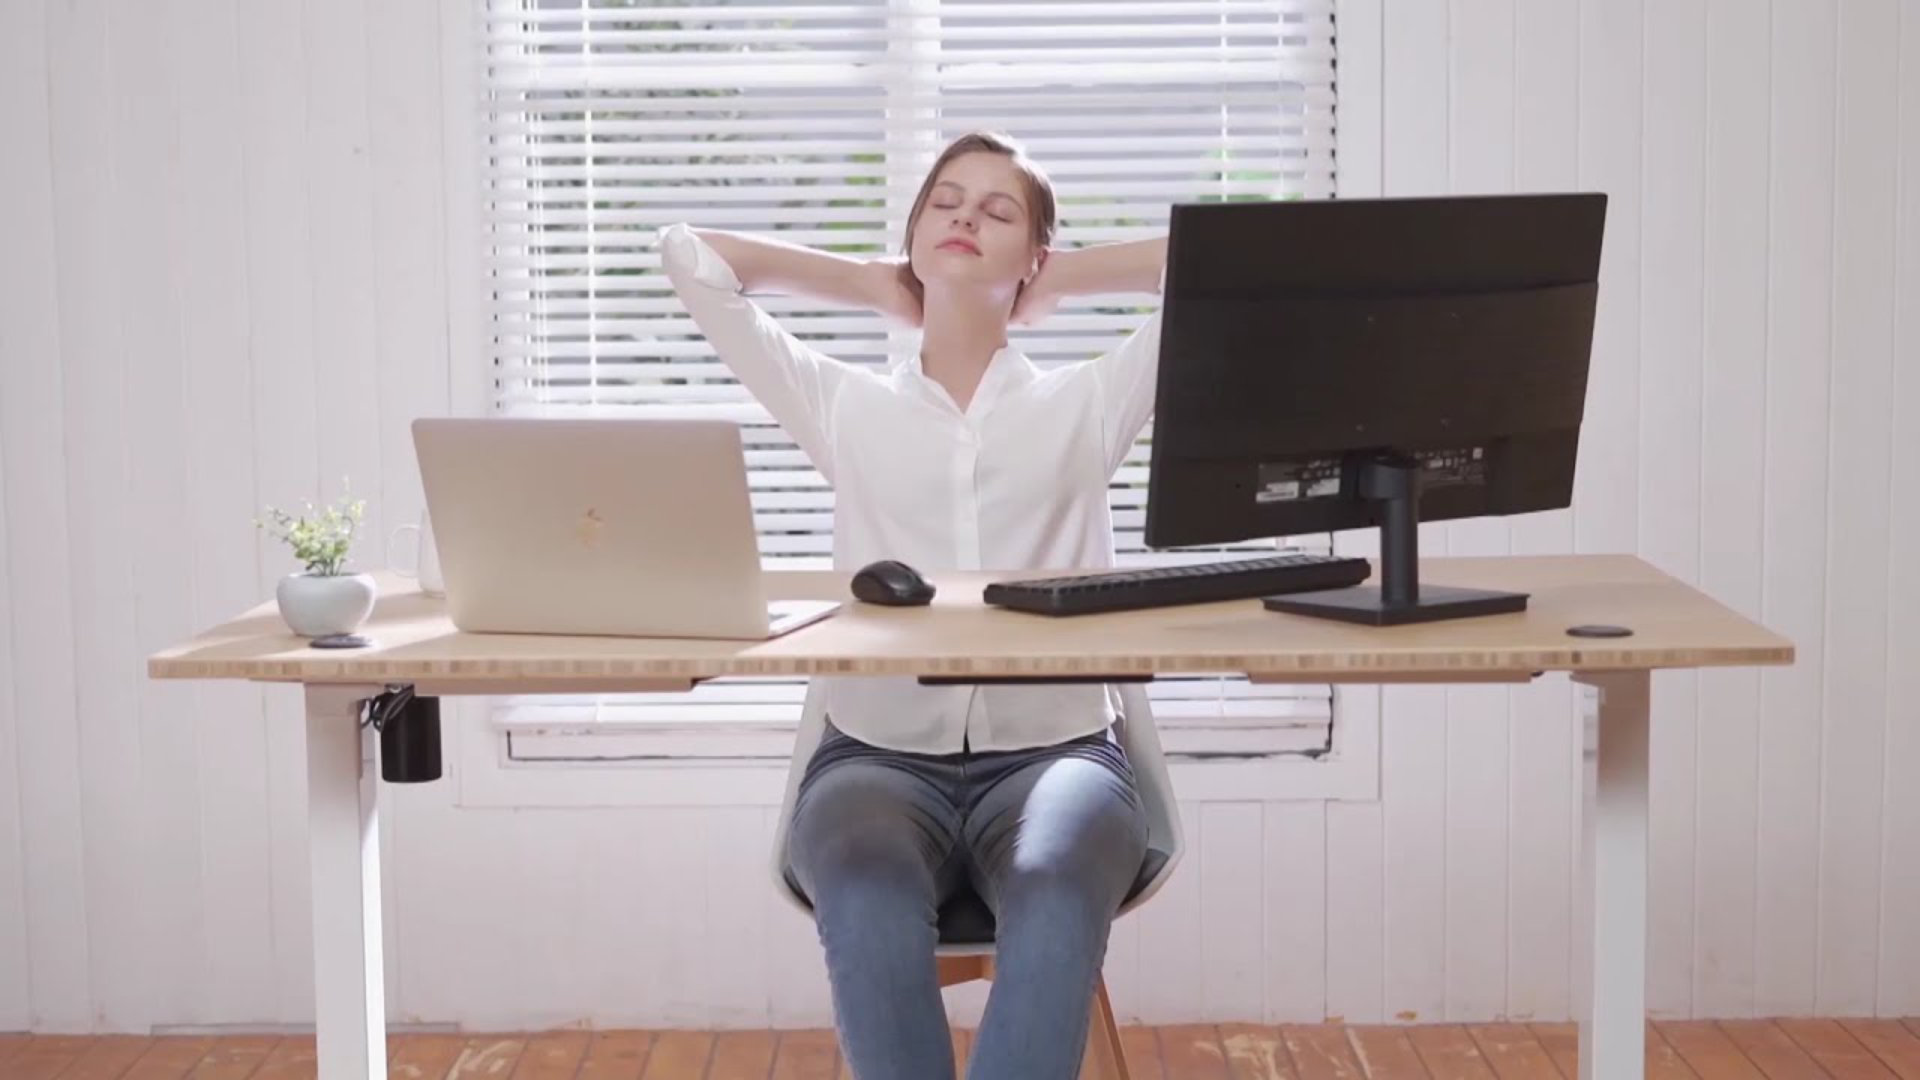 Save up to $50 on these Flexispot standing desks